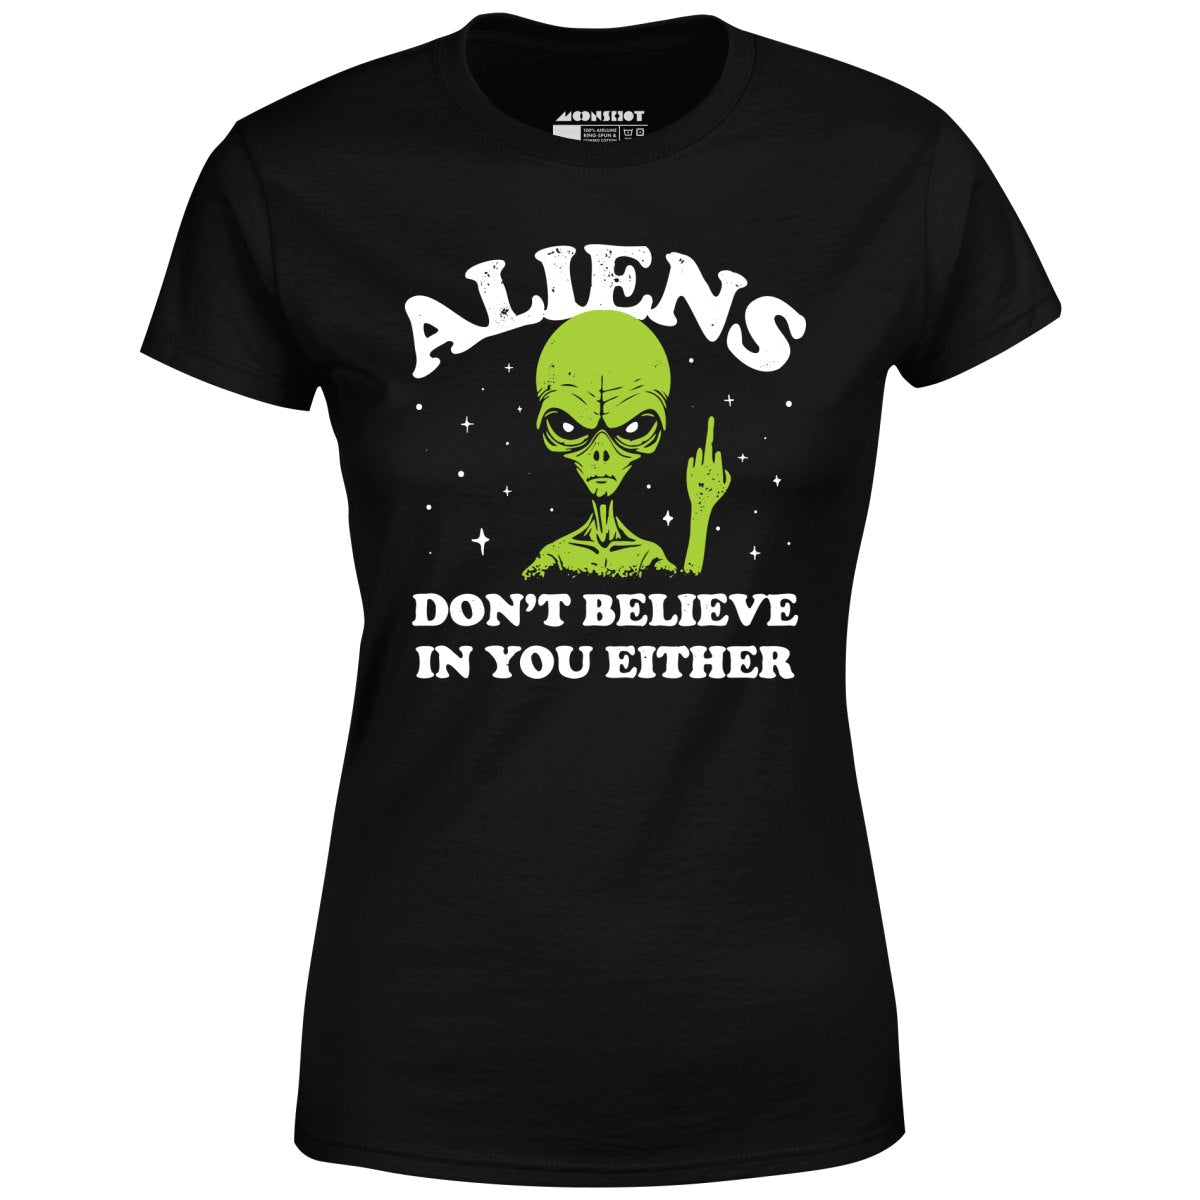 Aliens Don't Believe in You Either - Women's T-Shirt